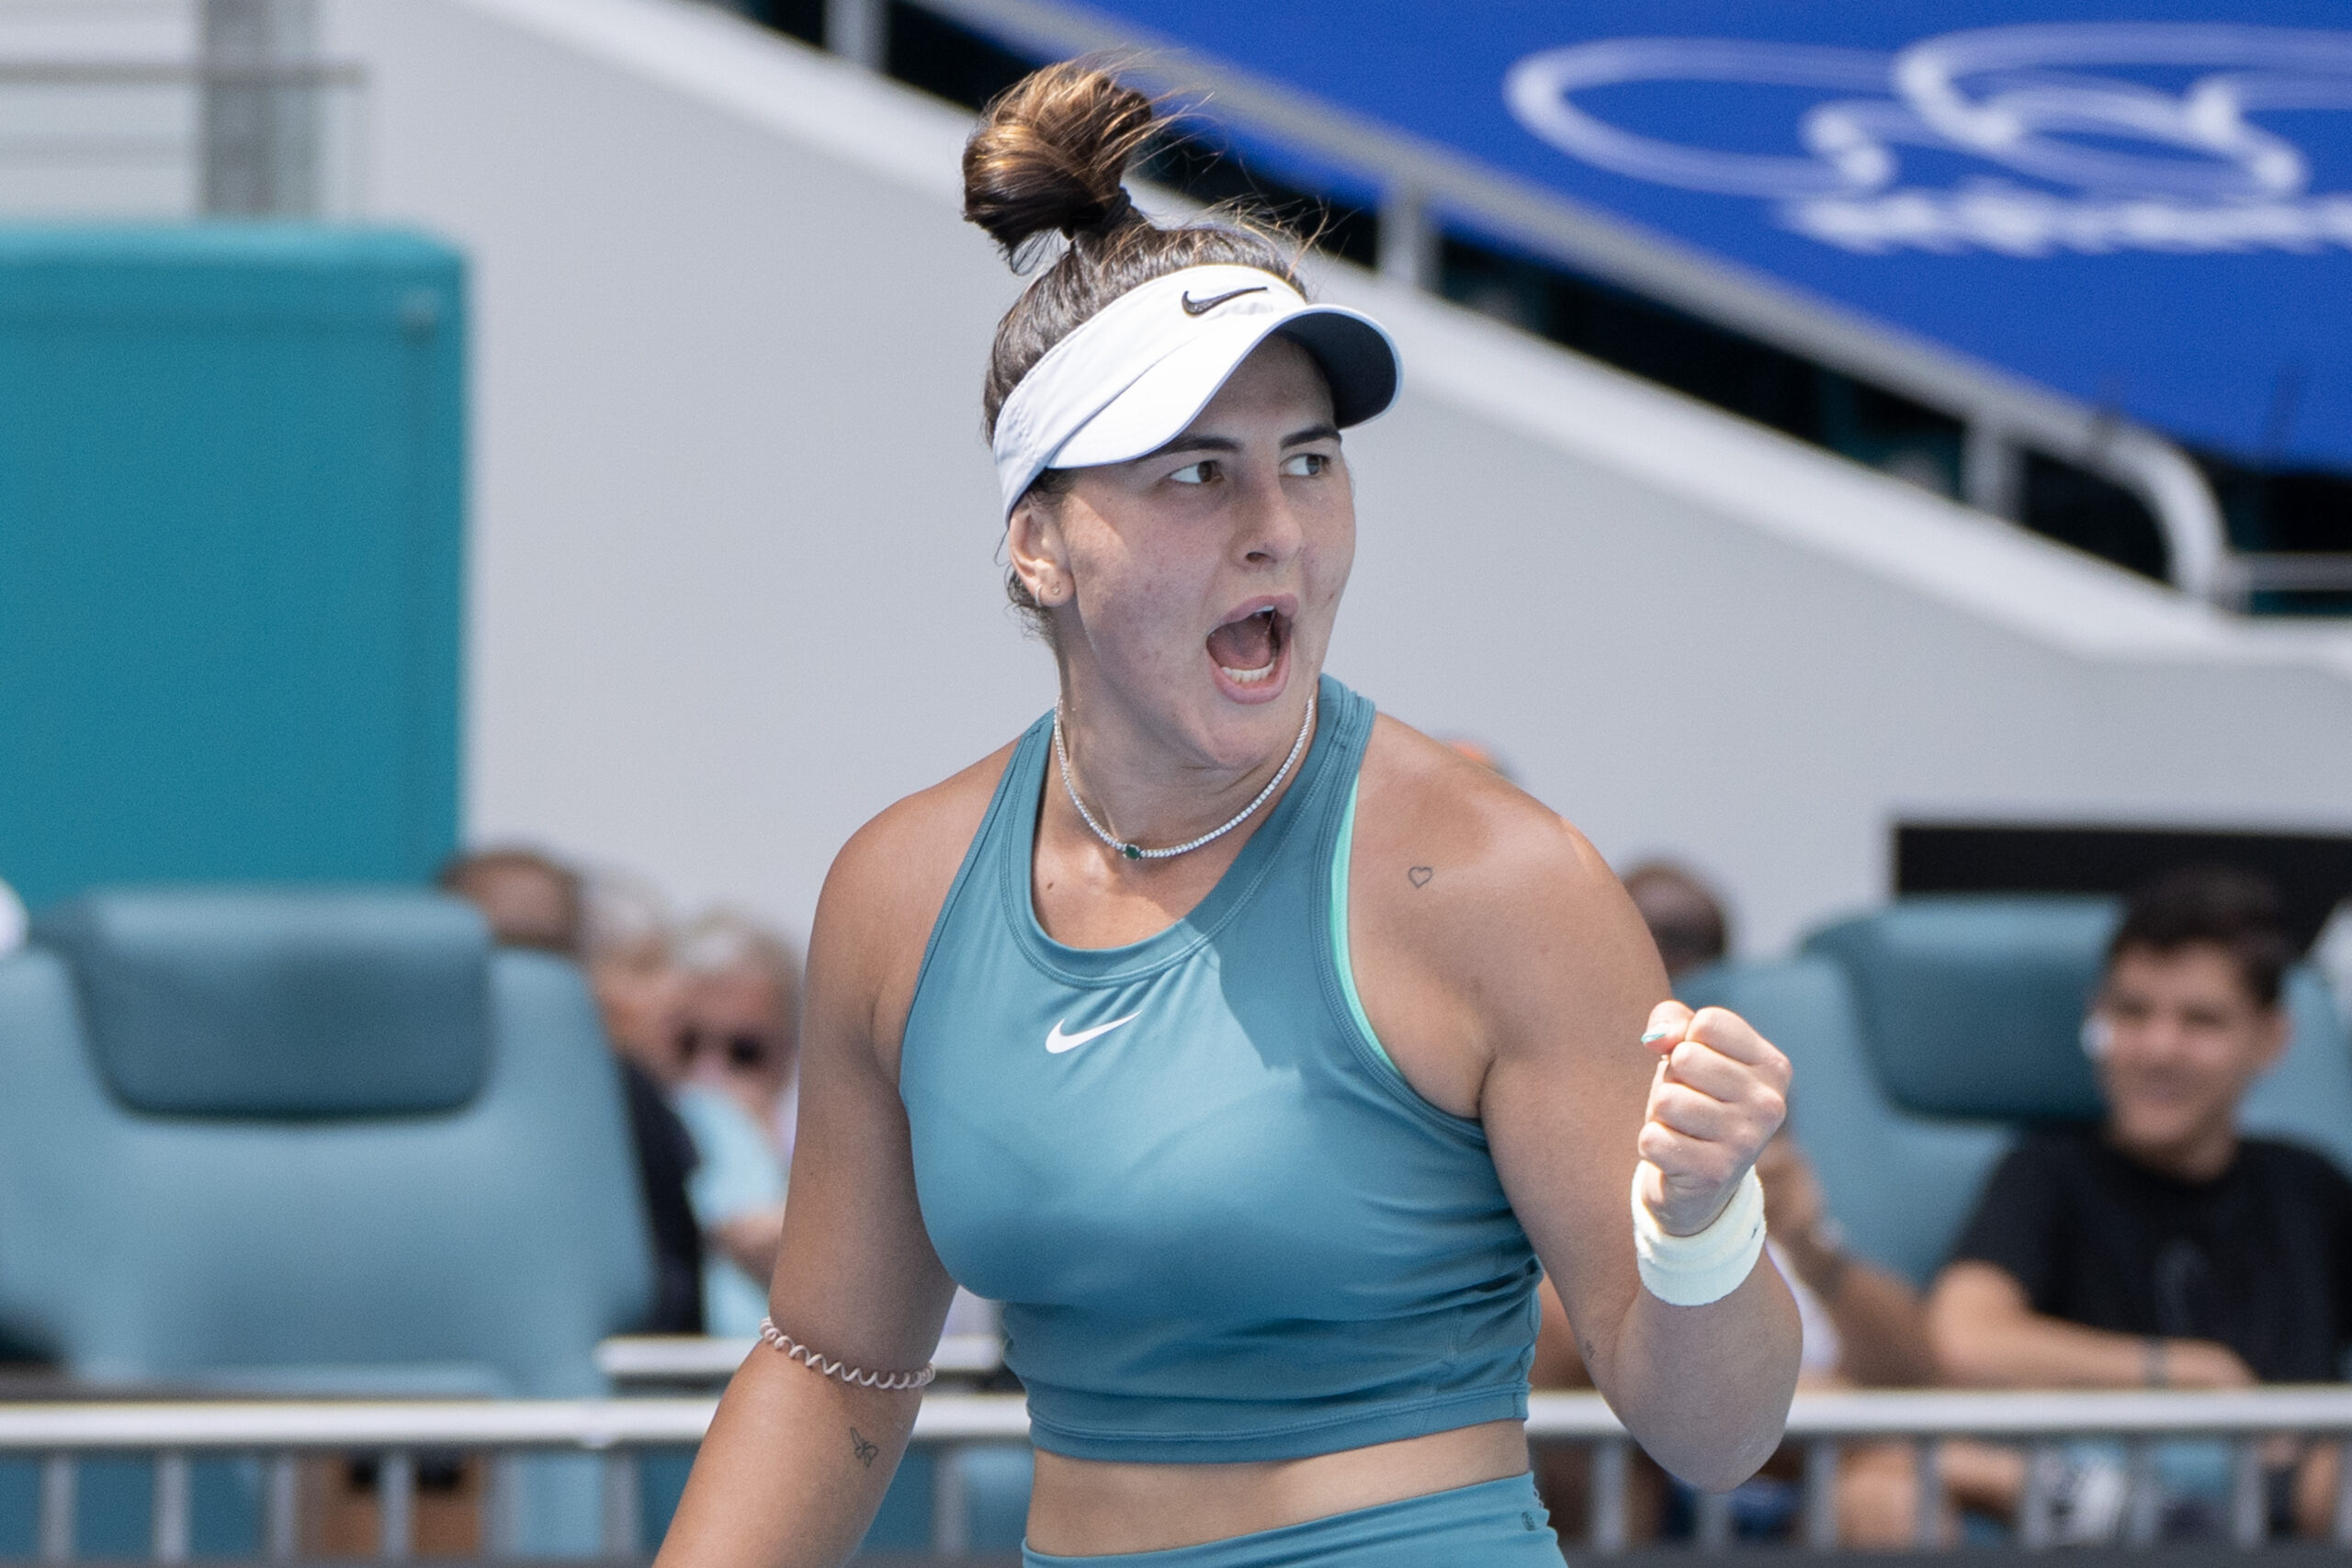 Bianca Andreescu at the Miami Open on March 22, 2023